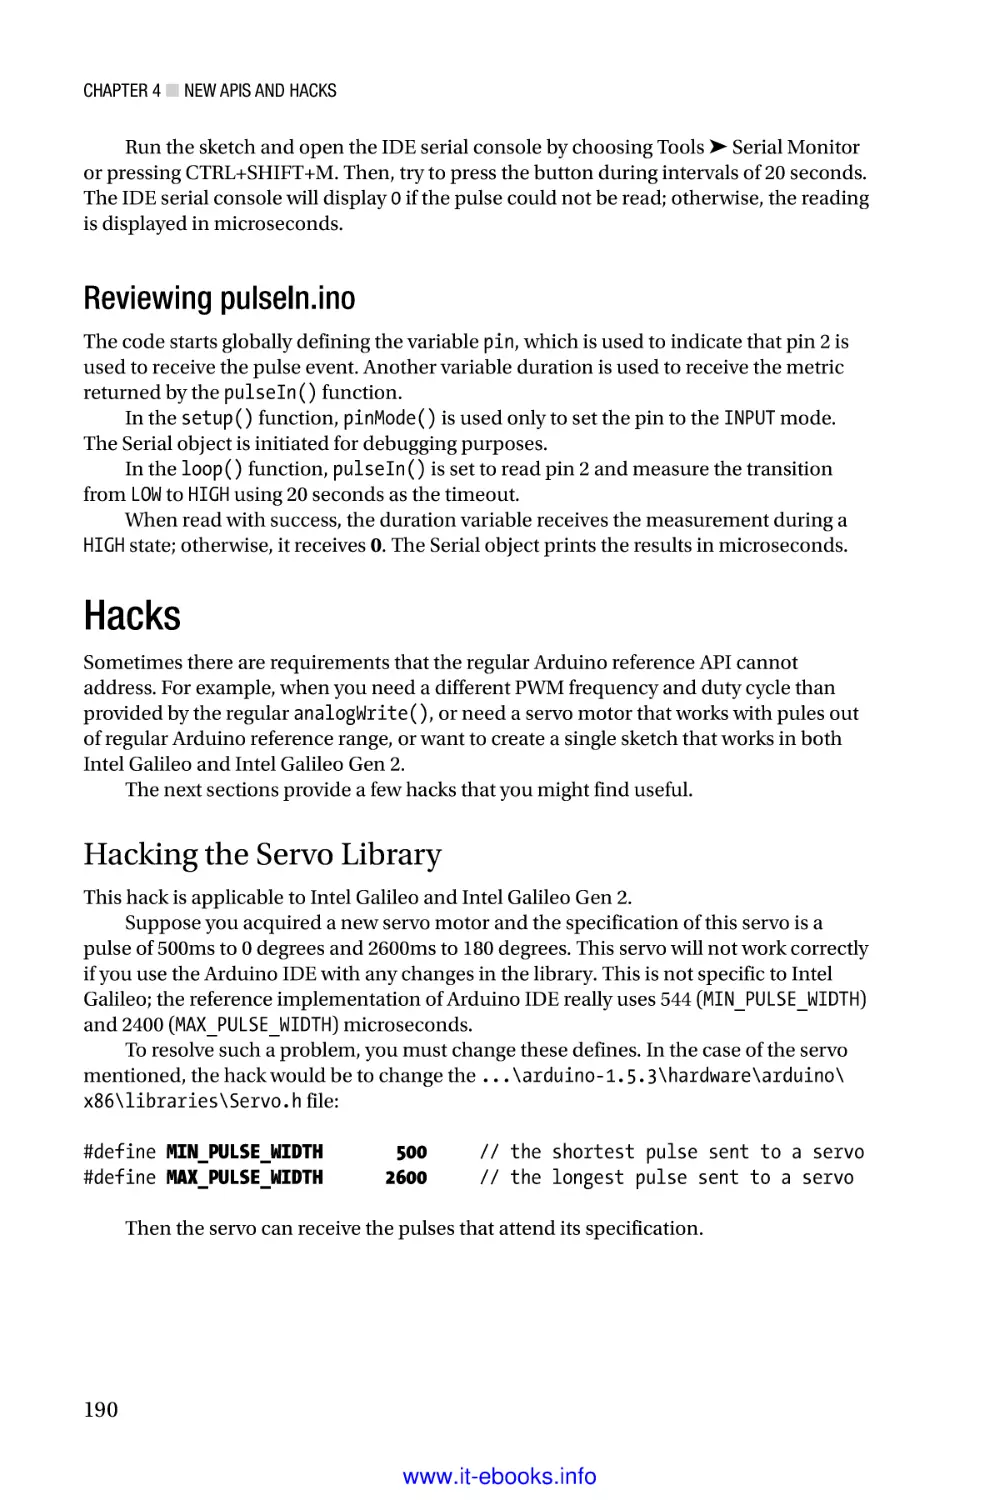 Reviewing pulseIn.ino
Hacks
Hacking the Servo Library